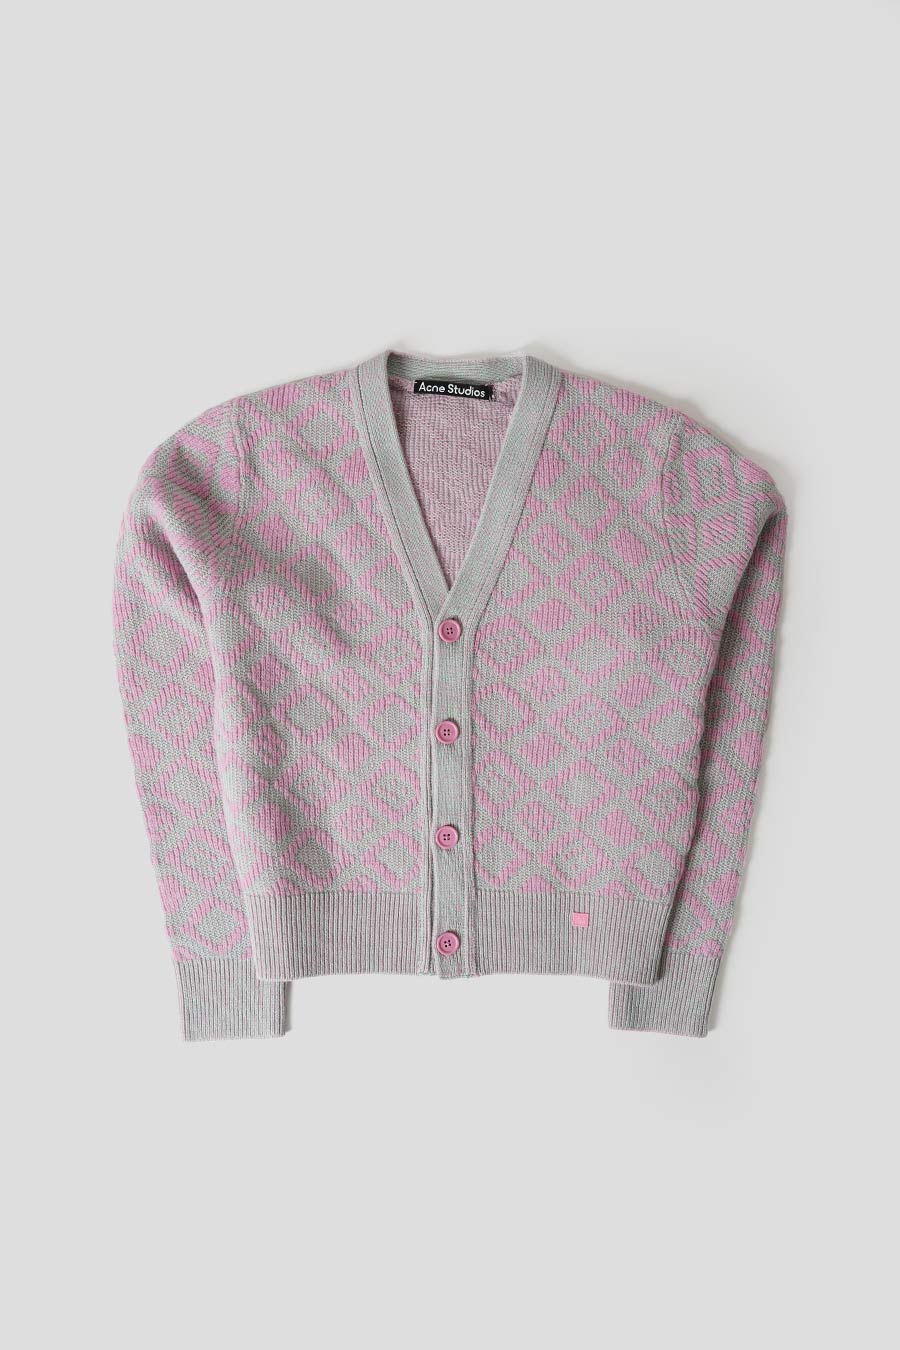 ACNE STUDIOS - FACE TILES BUBBLE PINK AND SPRING GREEN CARDIGAN - LE LABO STORE